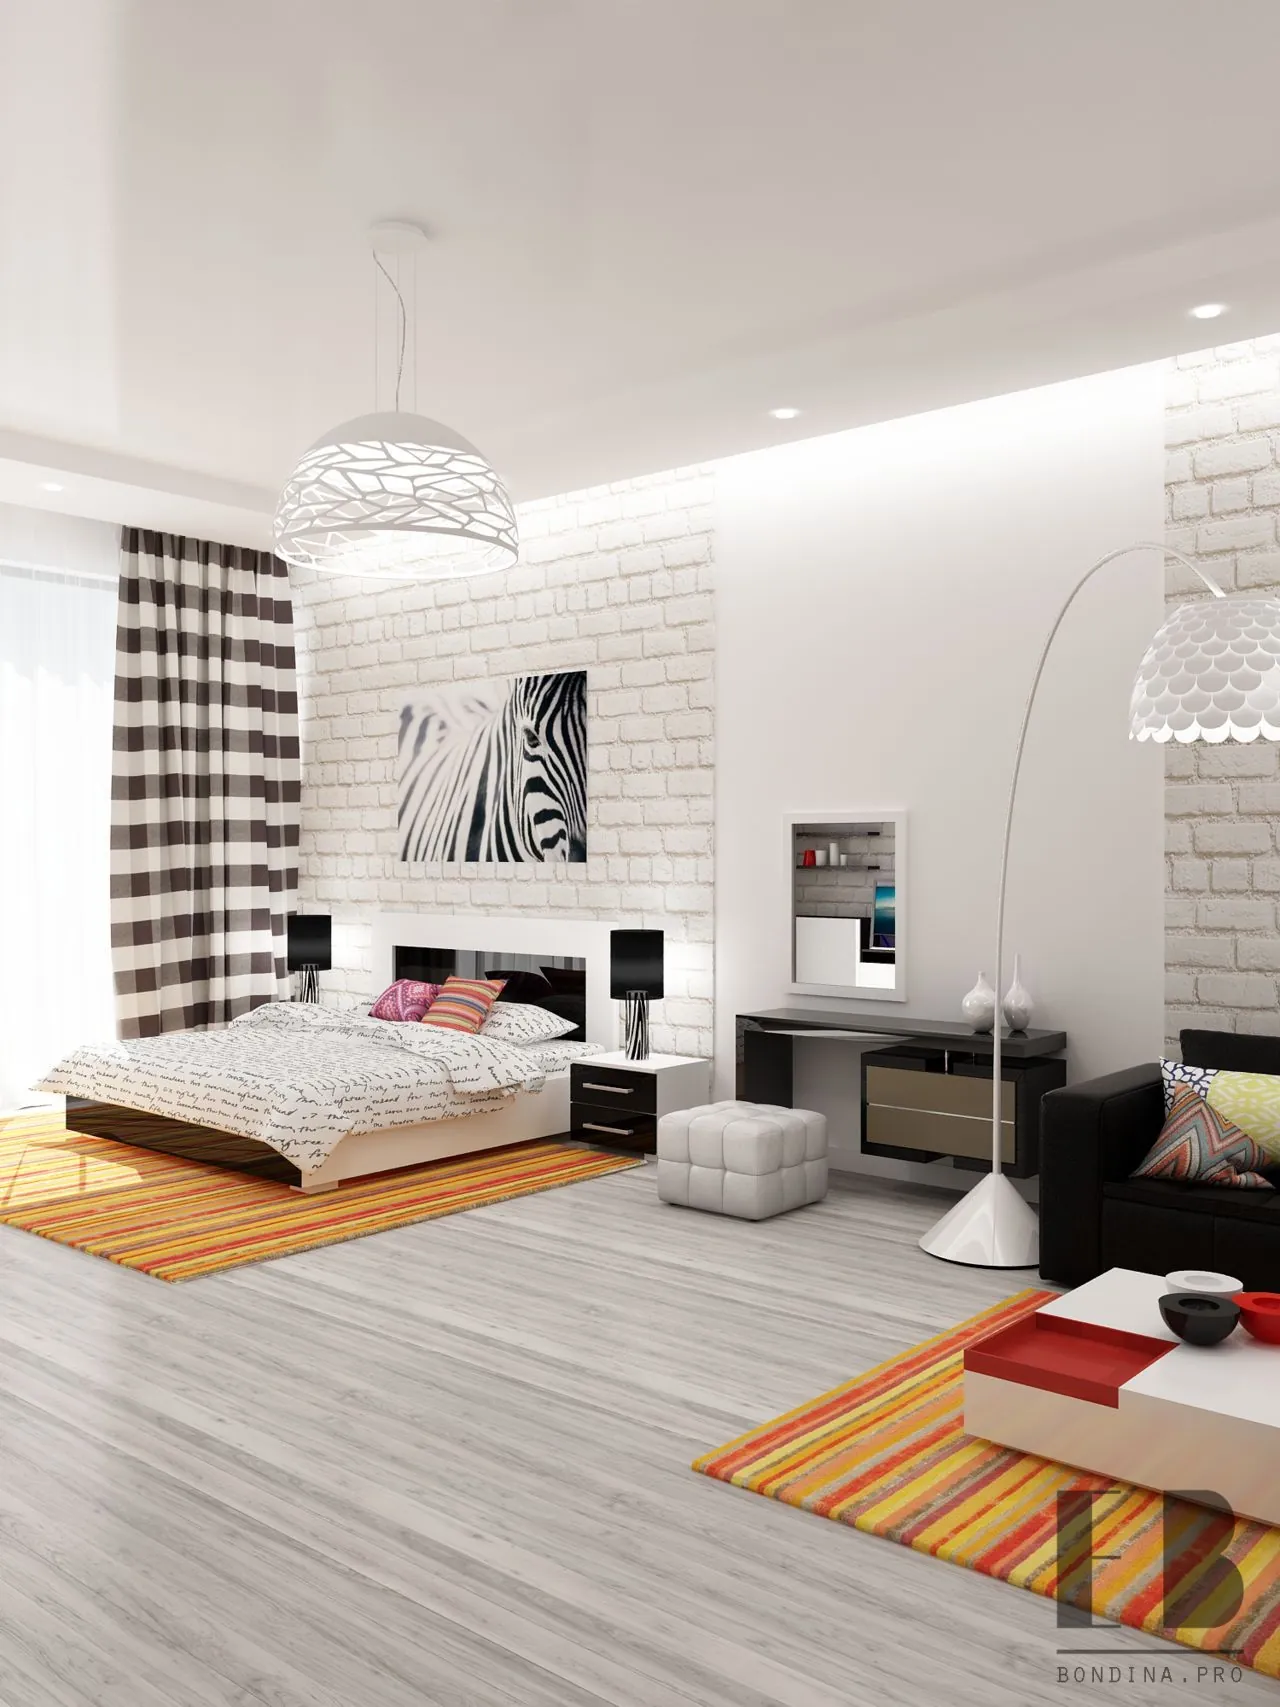 Living room and bedroom in one room design